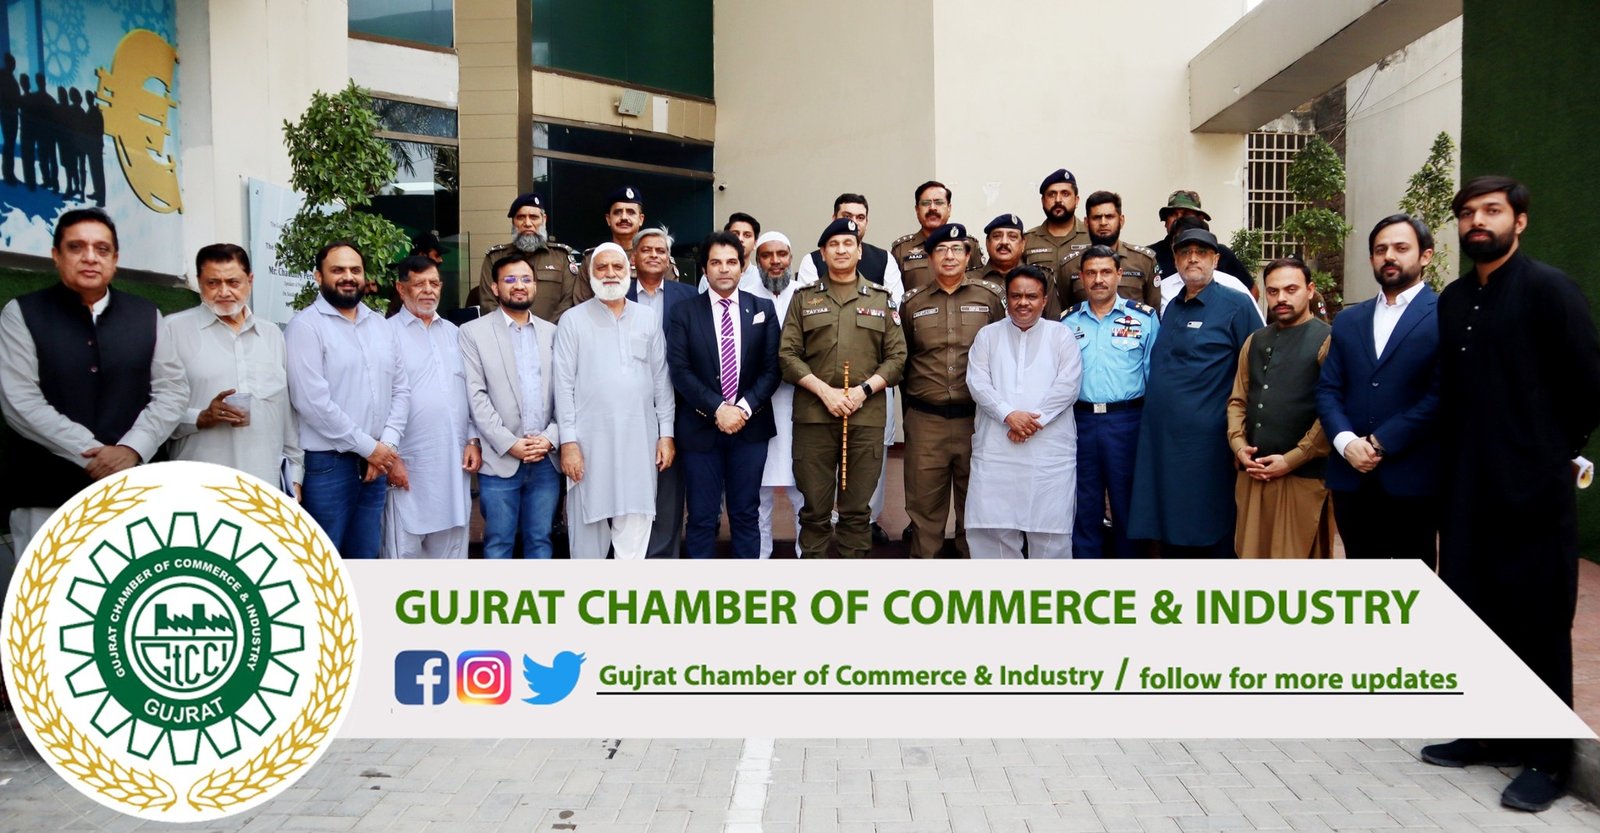 Mr. Tayyab Hafeez Cheema, Regional Police Officer RPO Gujranwala , along with Mr. Mustansir Atta Bajwa, District Police Officer #DPO Gujrat, and other officials, visited the Gujrat Chamber of Commerce & Industry #GtCCI.